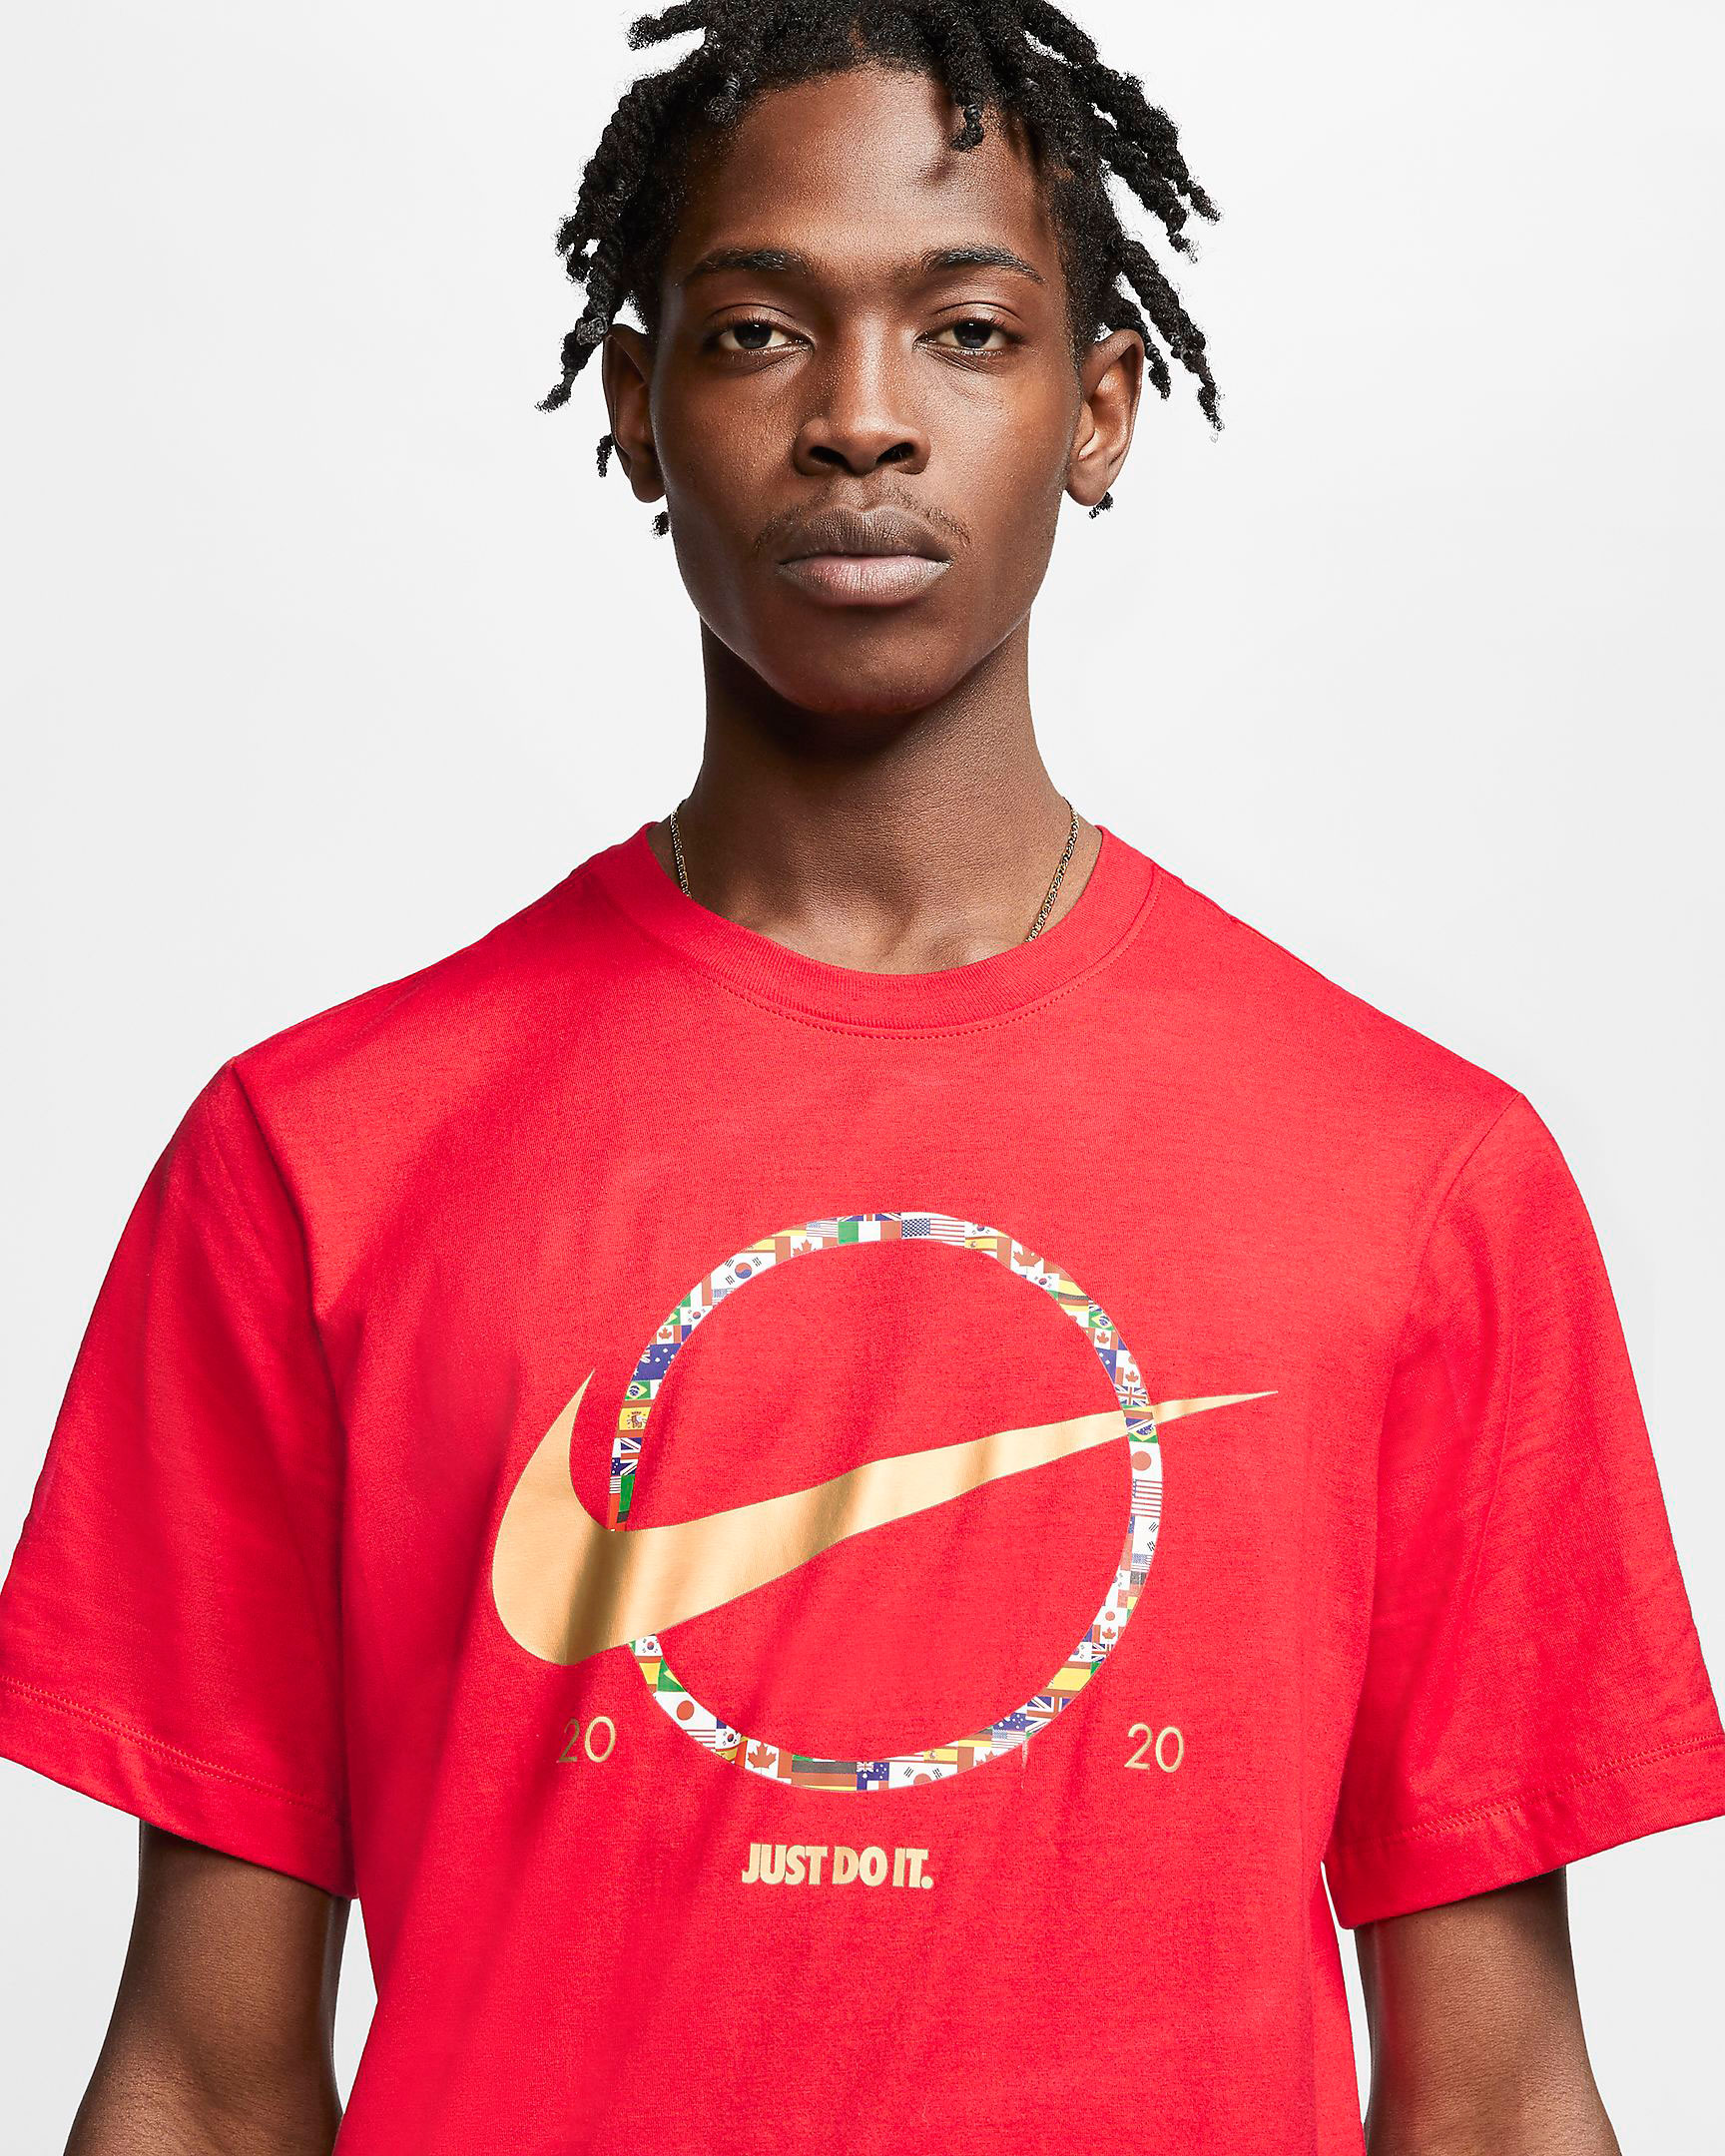 Buy > red and yellow nike shirt > in stock